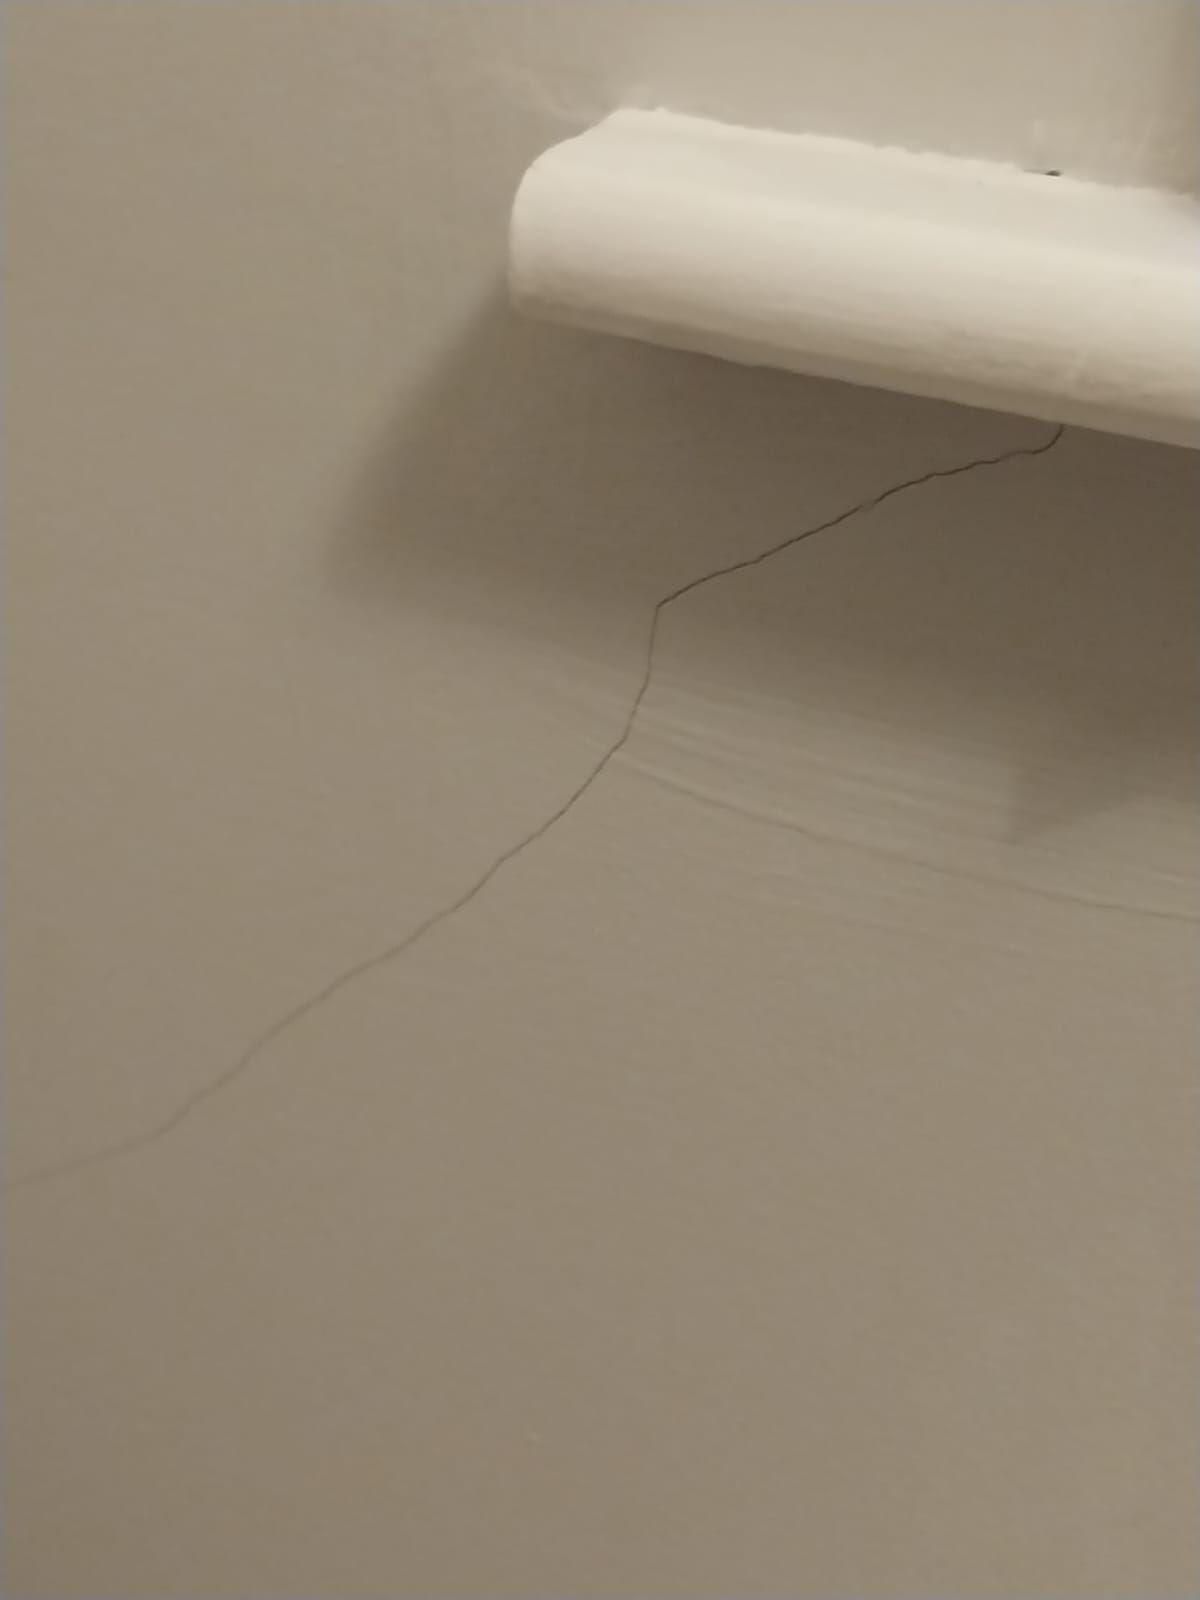 cracks in house wall greater manchester